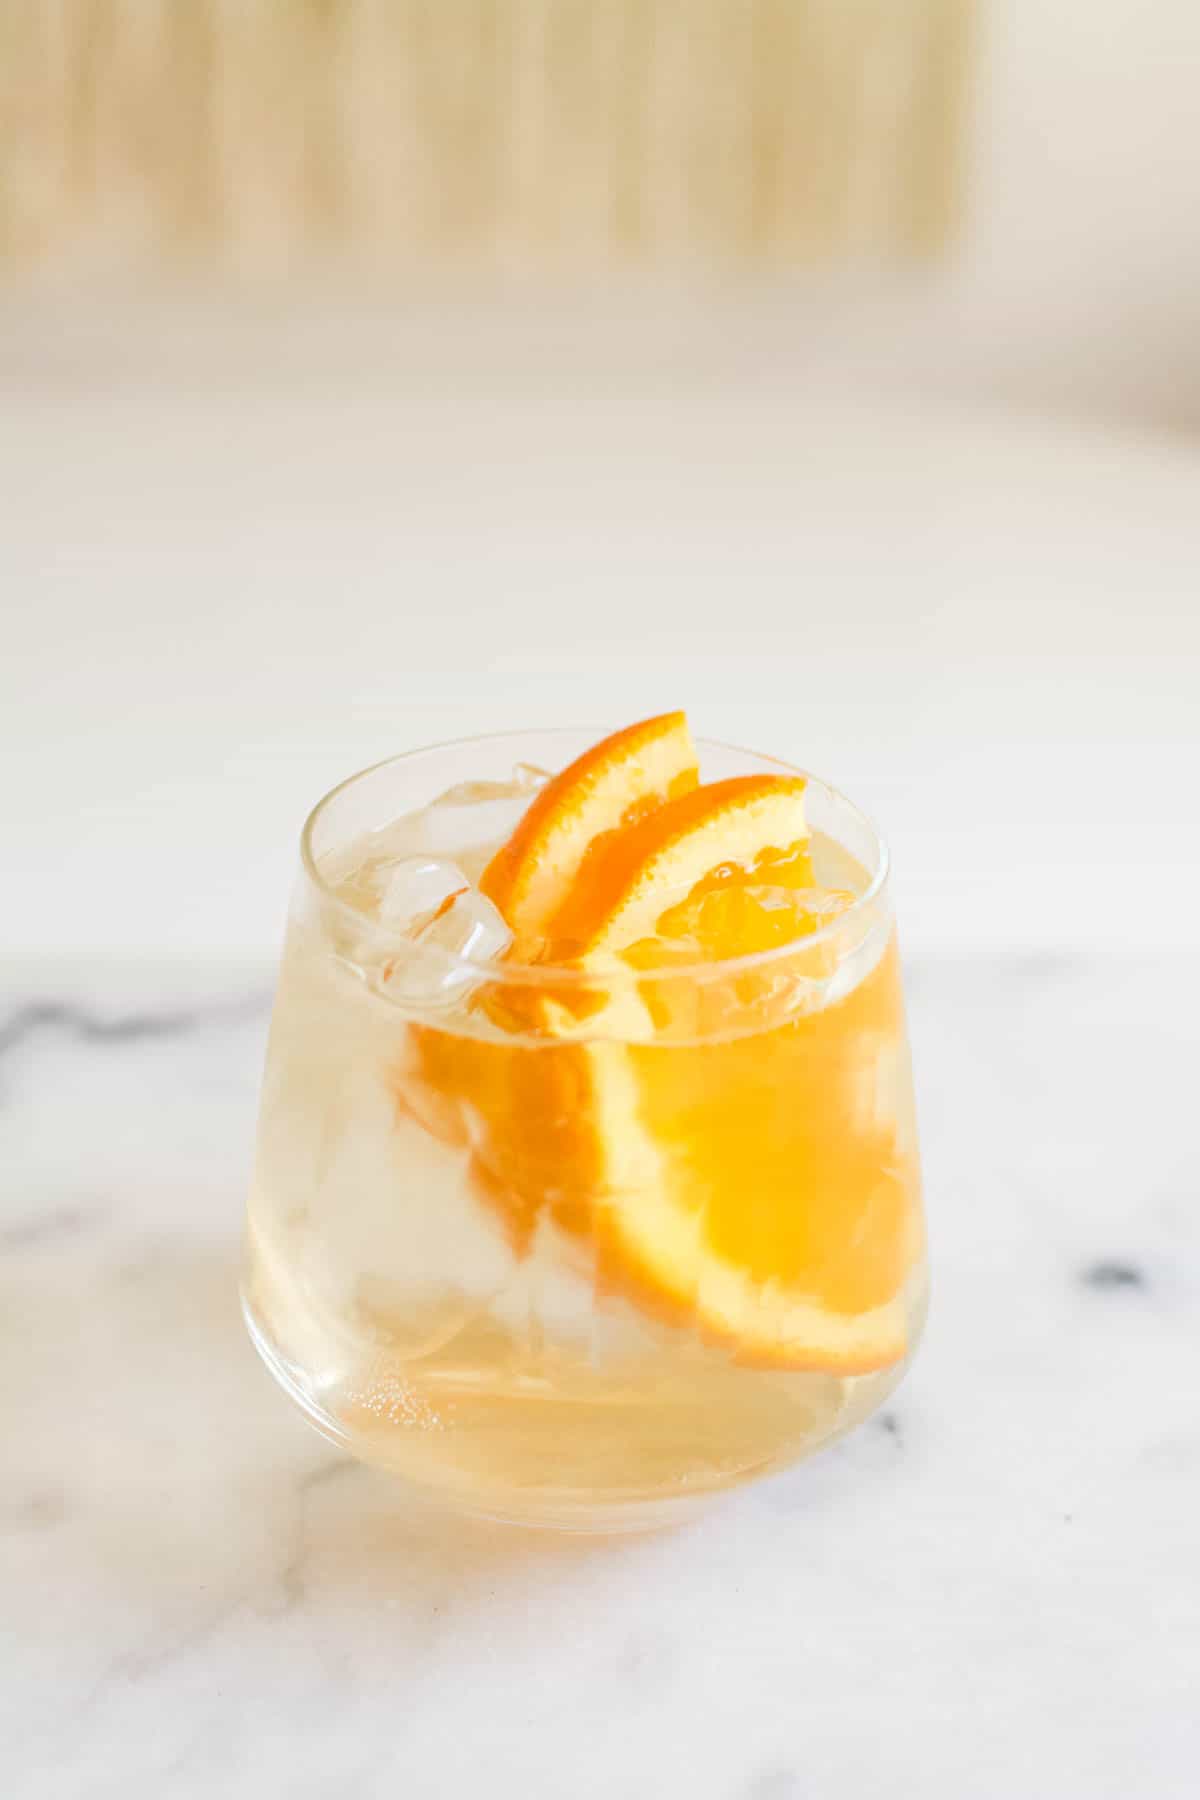 Glass of St Germain and Soda garnished with fresh orange slices on a marble countertop.